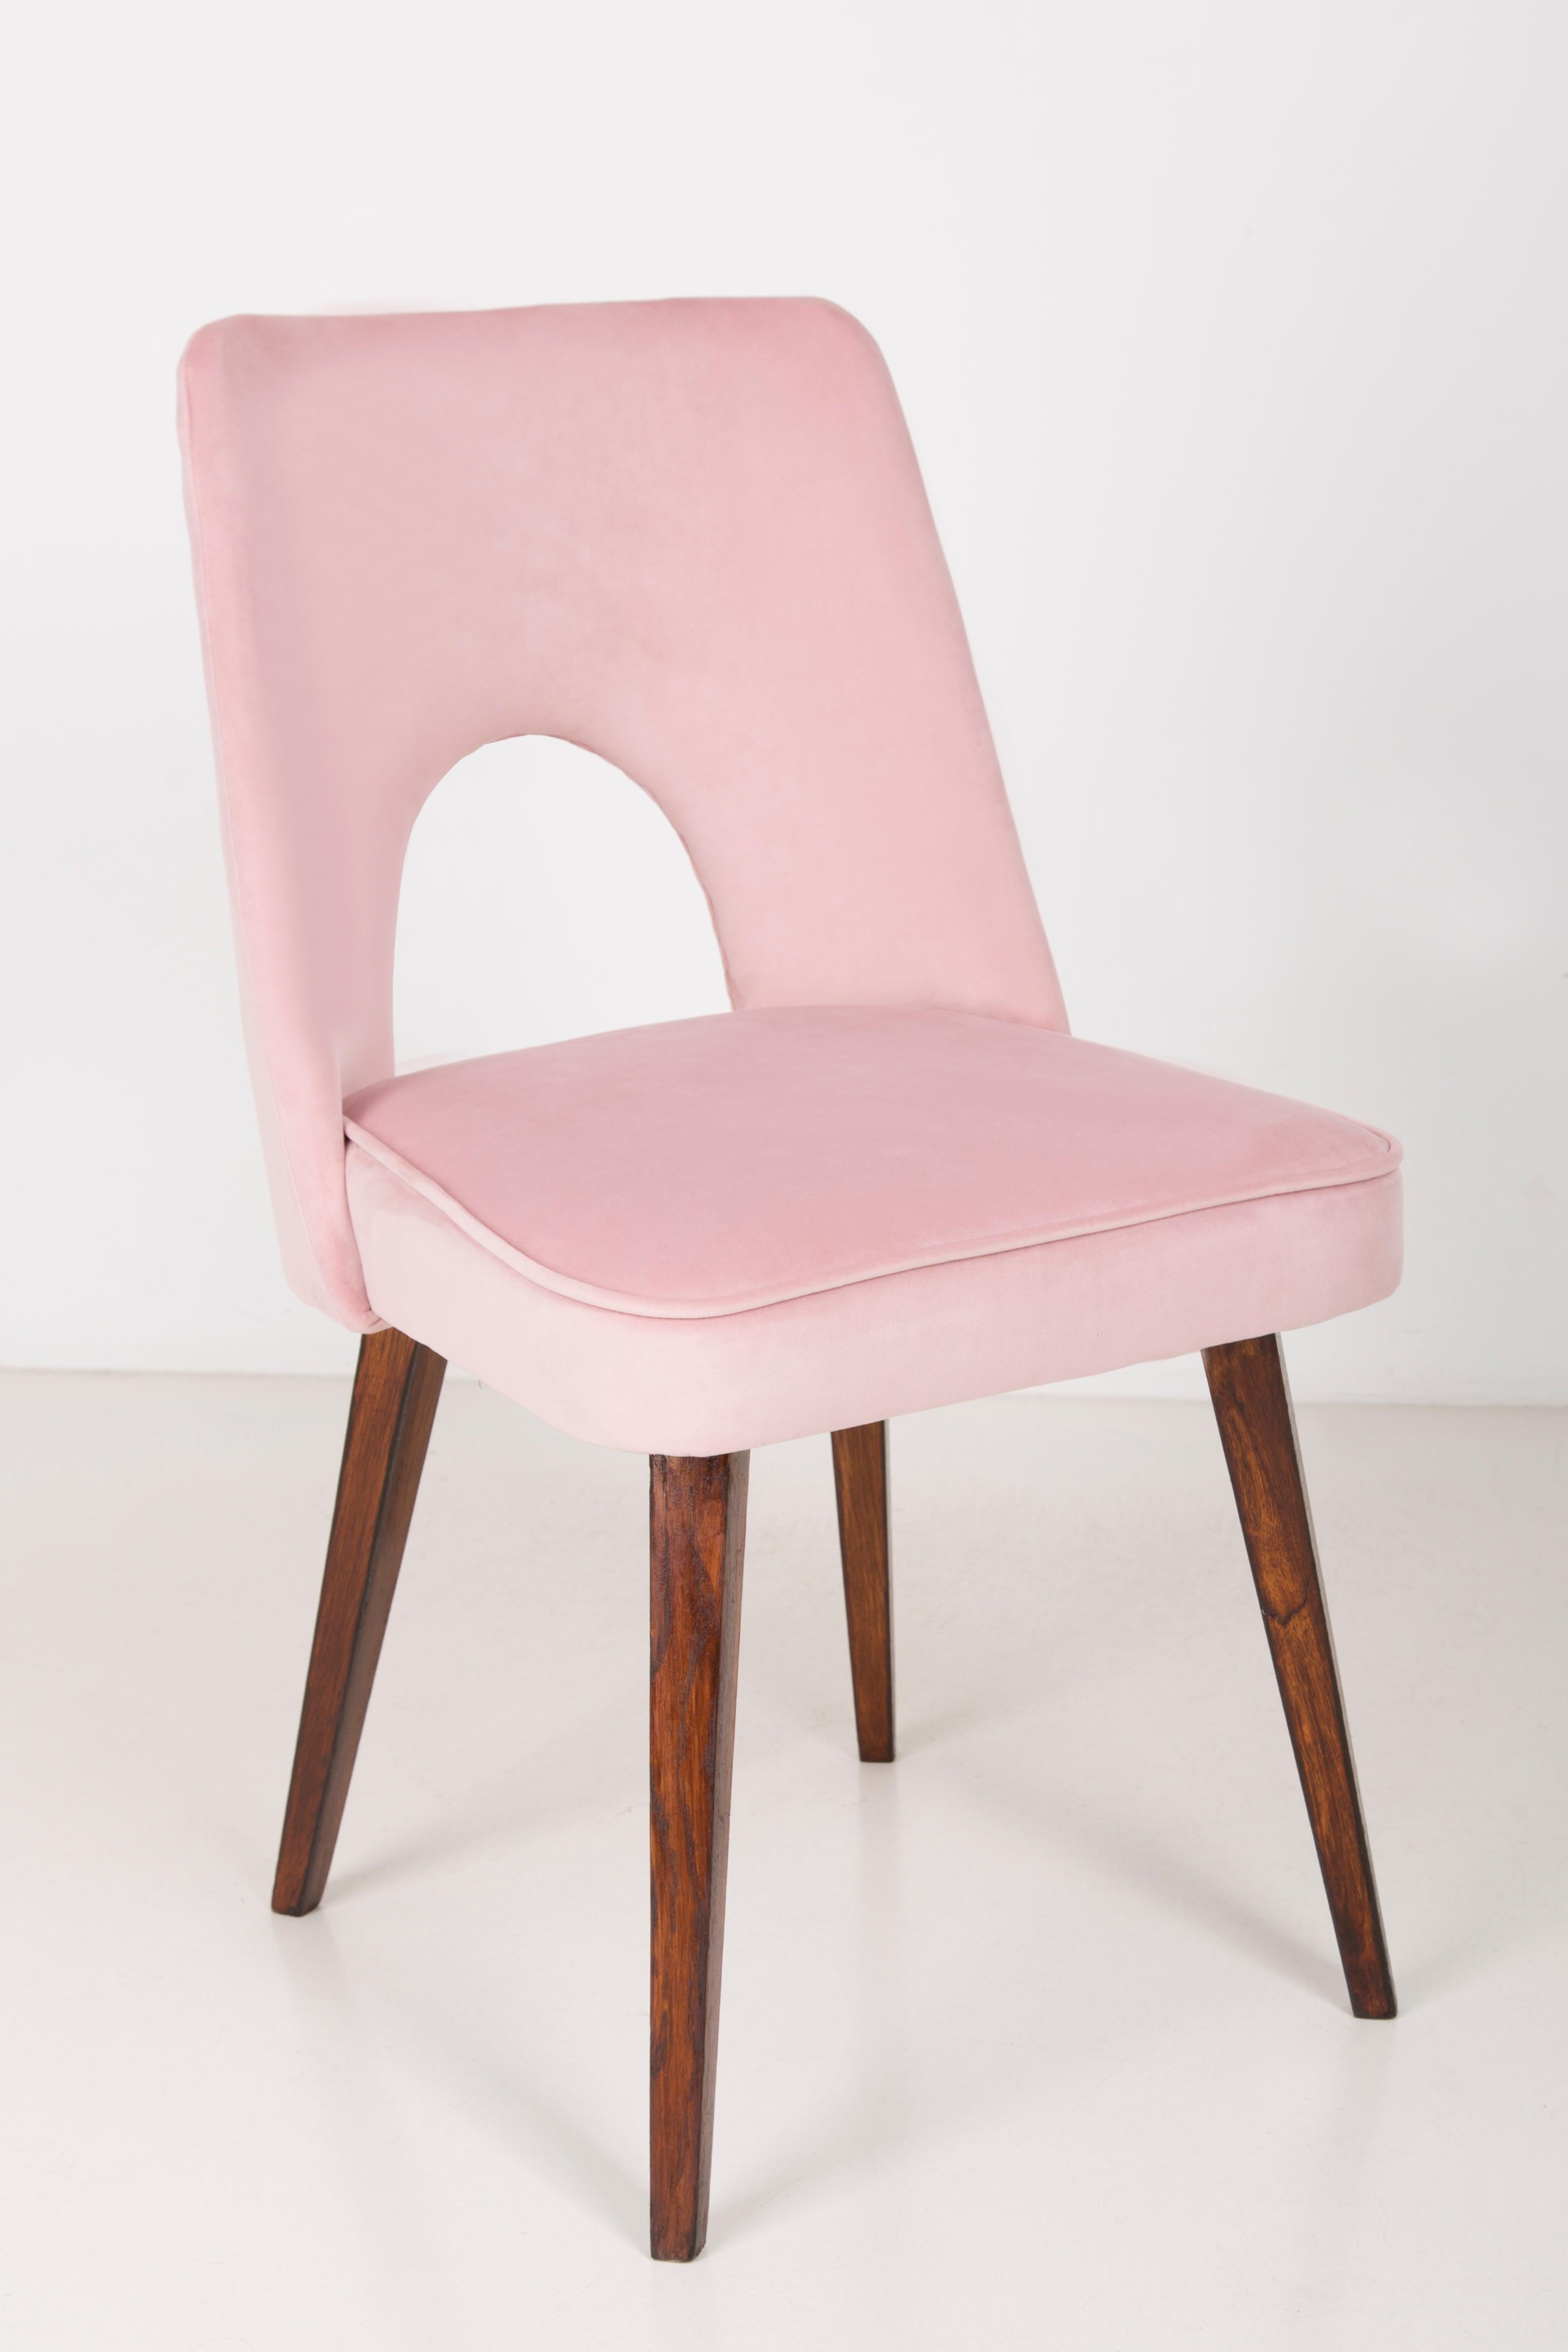 set of two pink chairs